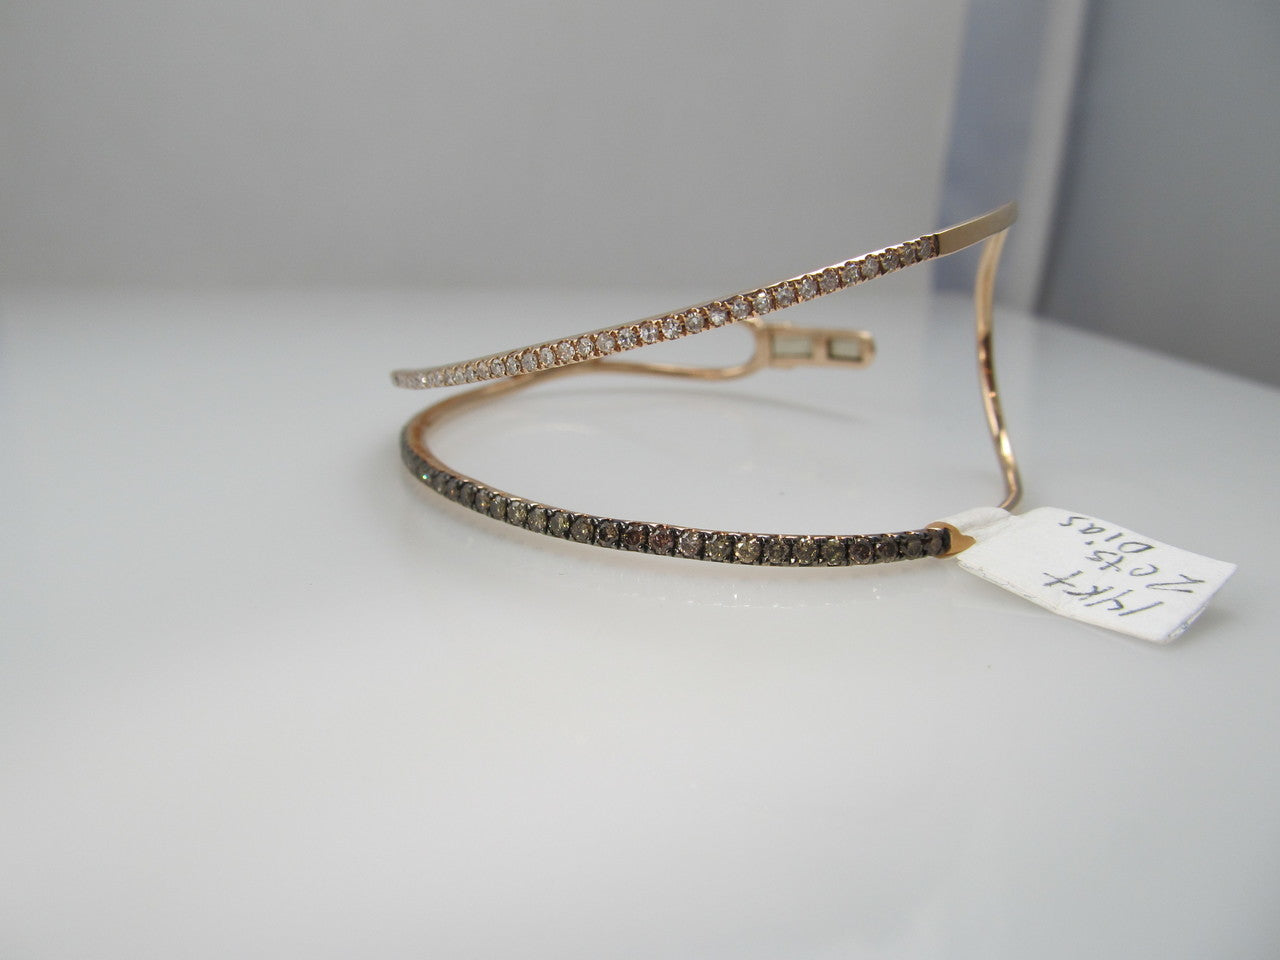 14k rose gold bracelet with 2cts in white and brown diamonds, signed Sofia